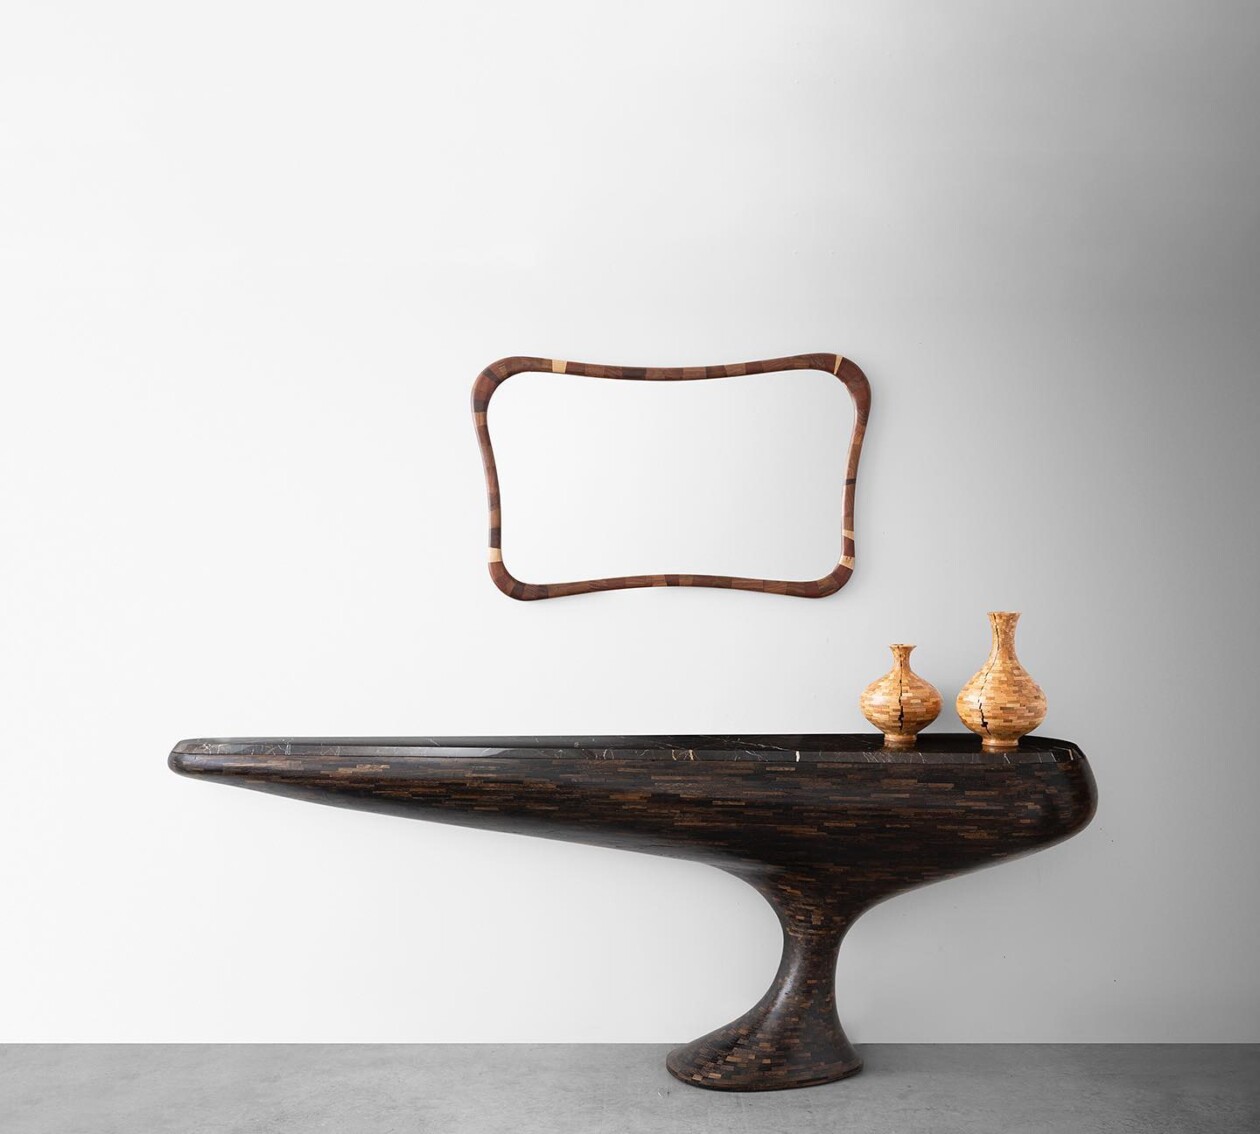 Elegant Sculptural Objects And Furniture By Richard Haining (22)